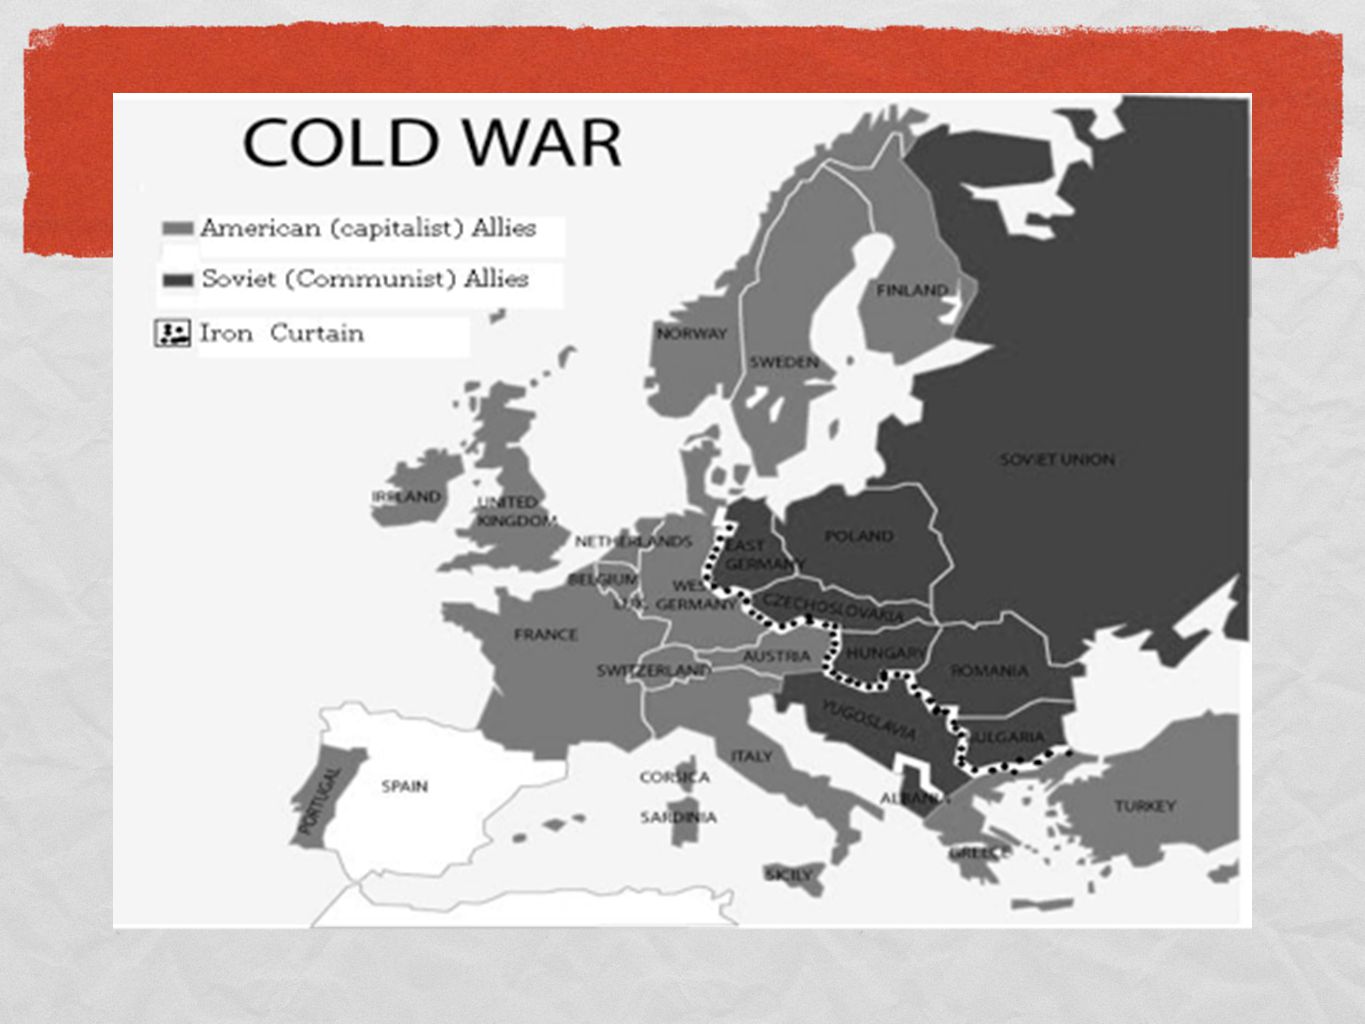 THE COLD WAR THE BERLIN AIRLIFT AND THE FORMATION OF NATO. - ppt download